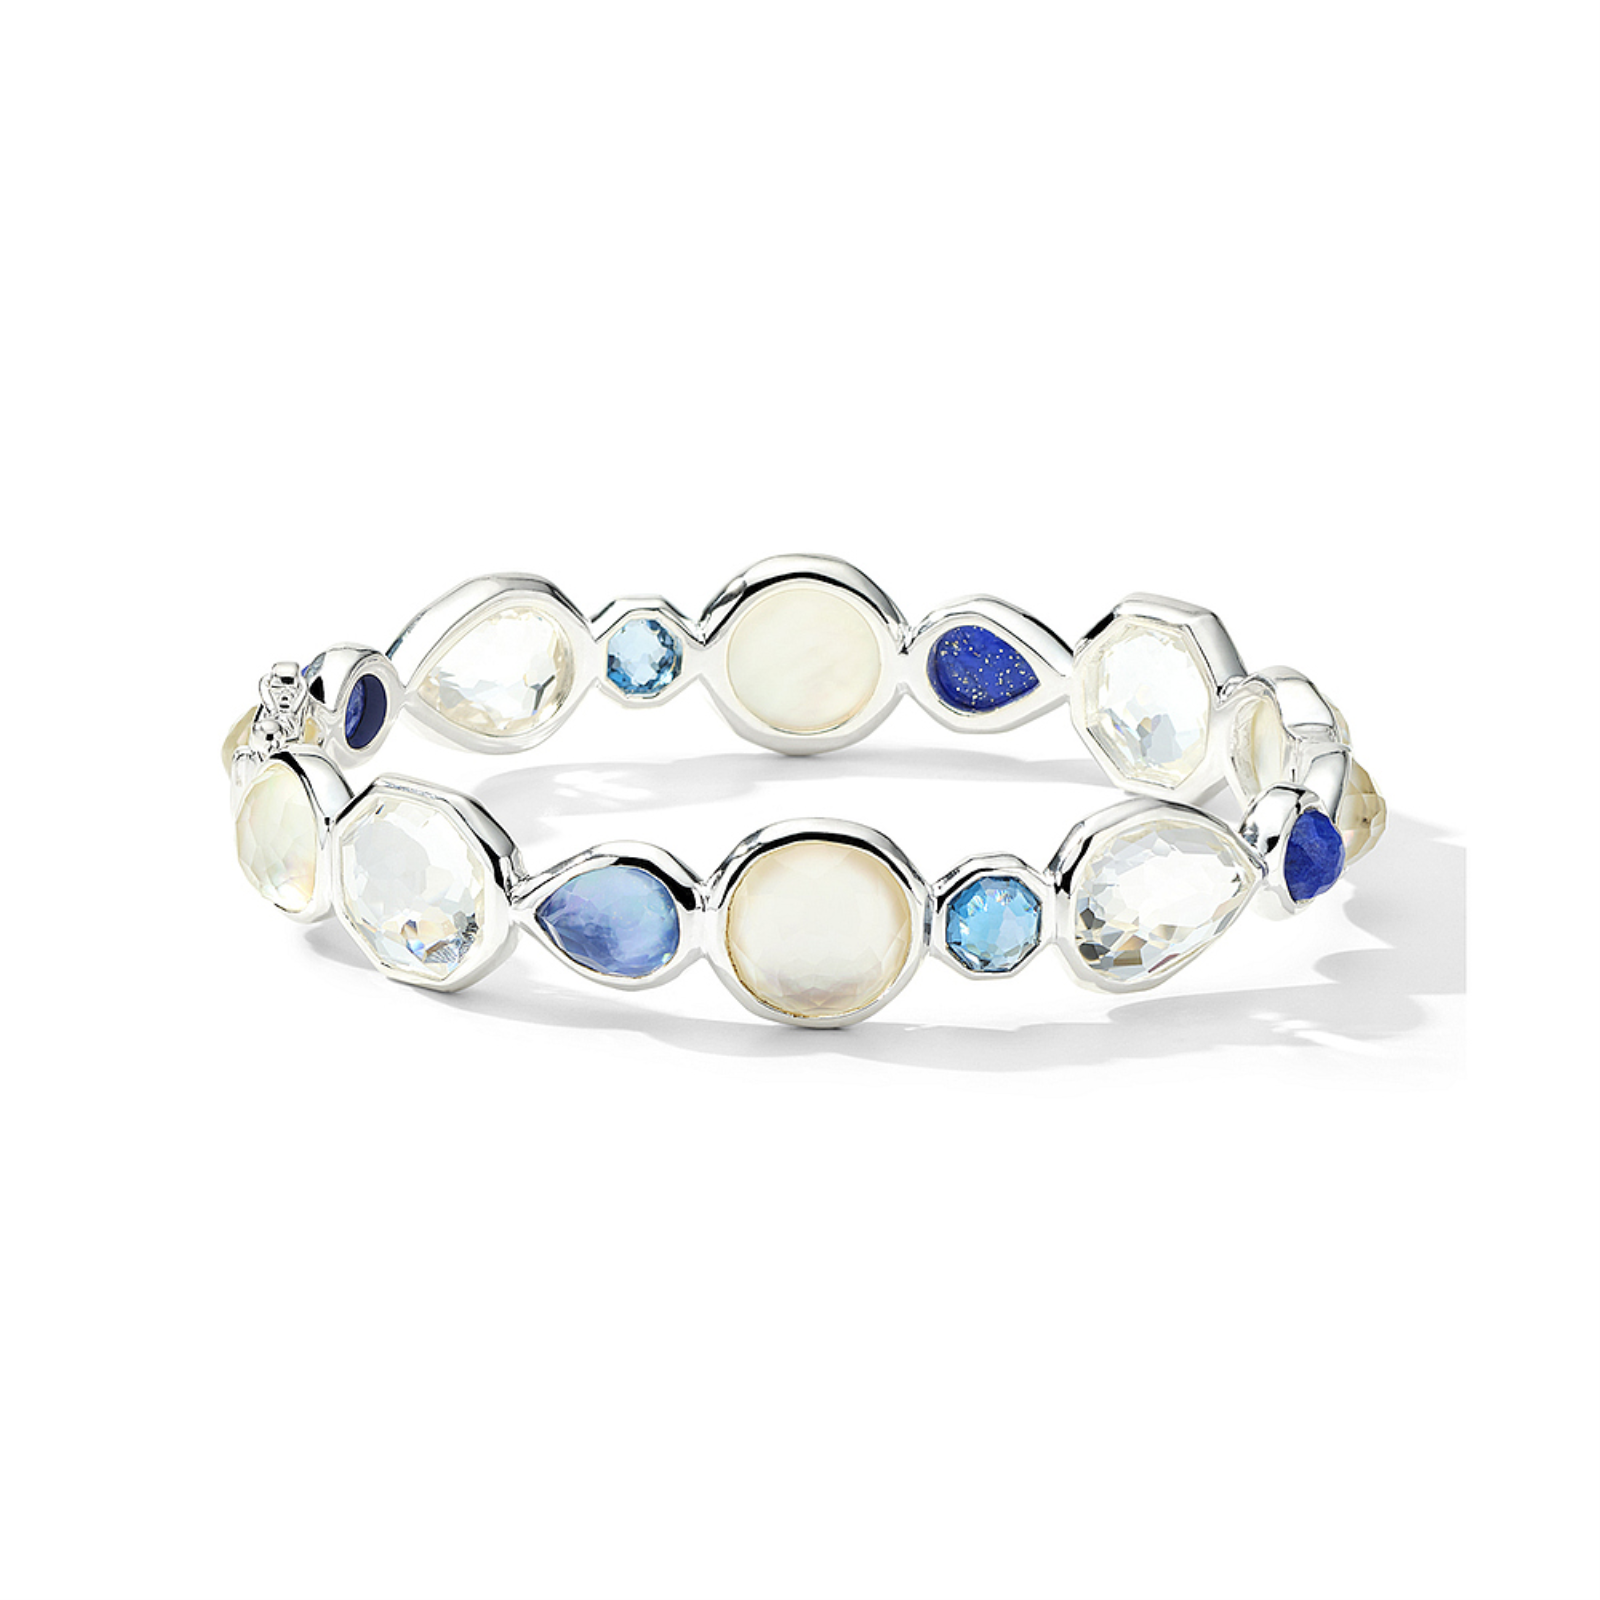 Sterling Silver Hinged Bangle Bracelet with Multi Stone